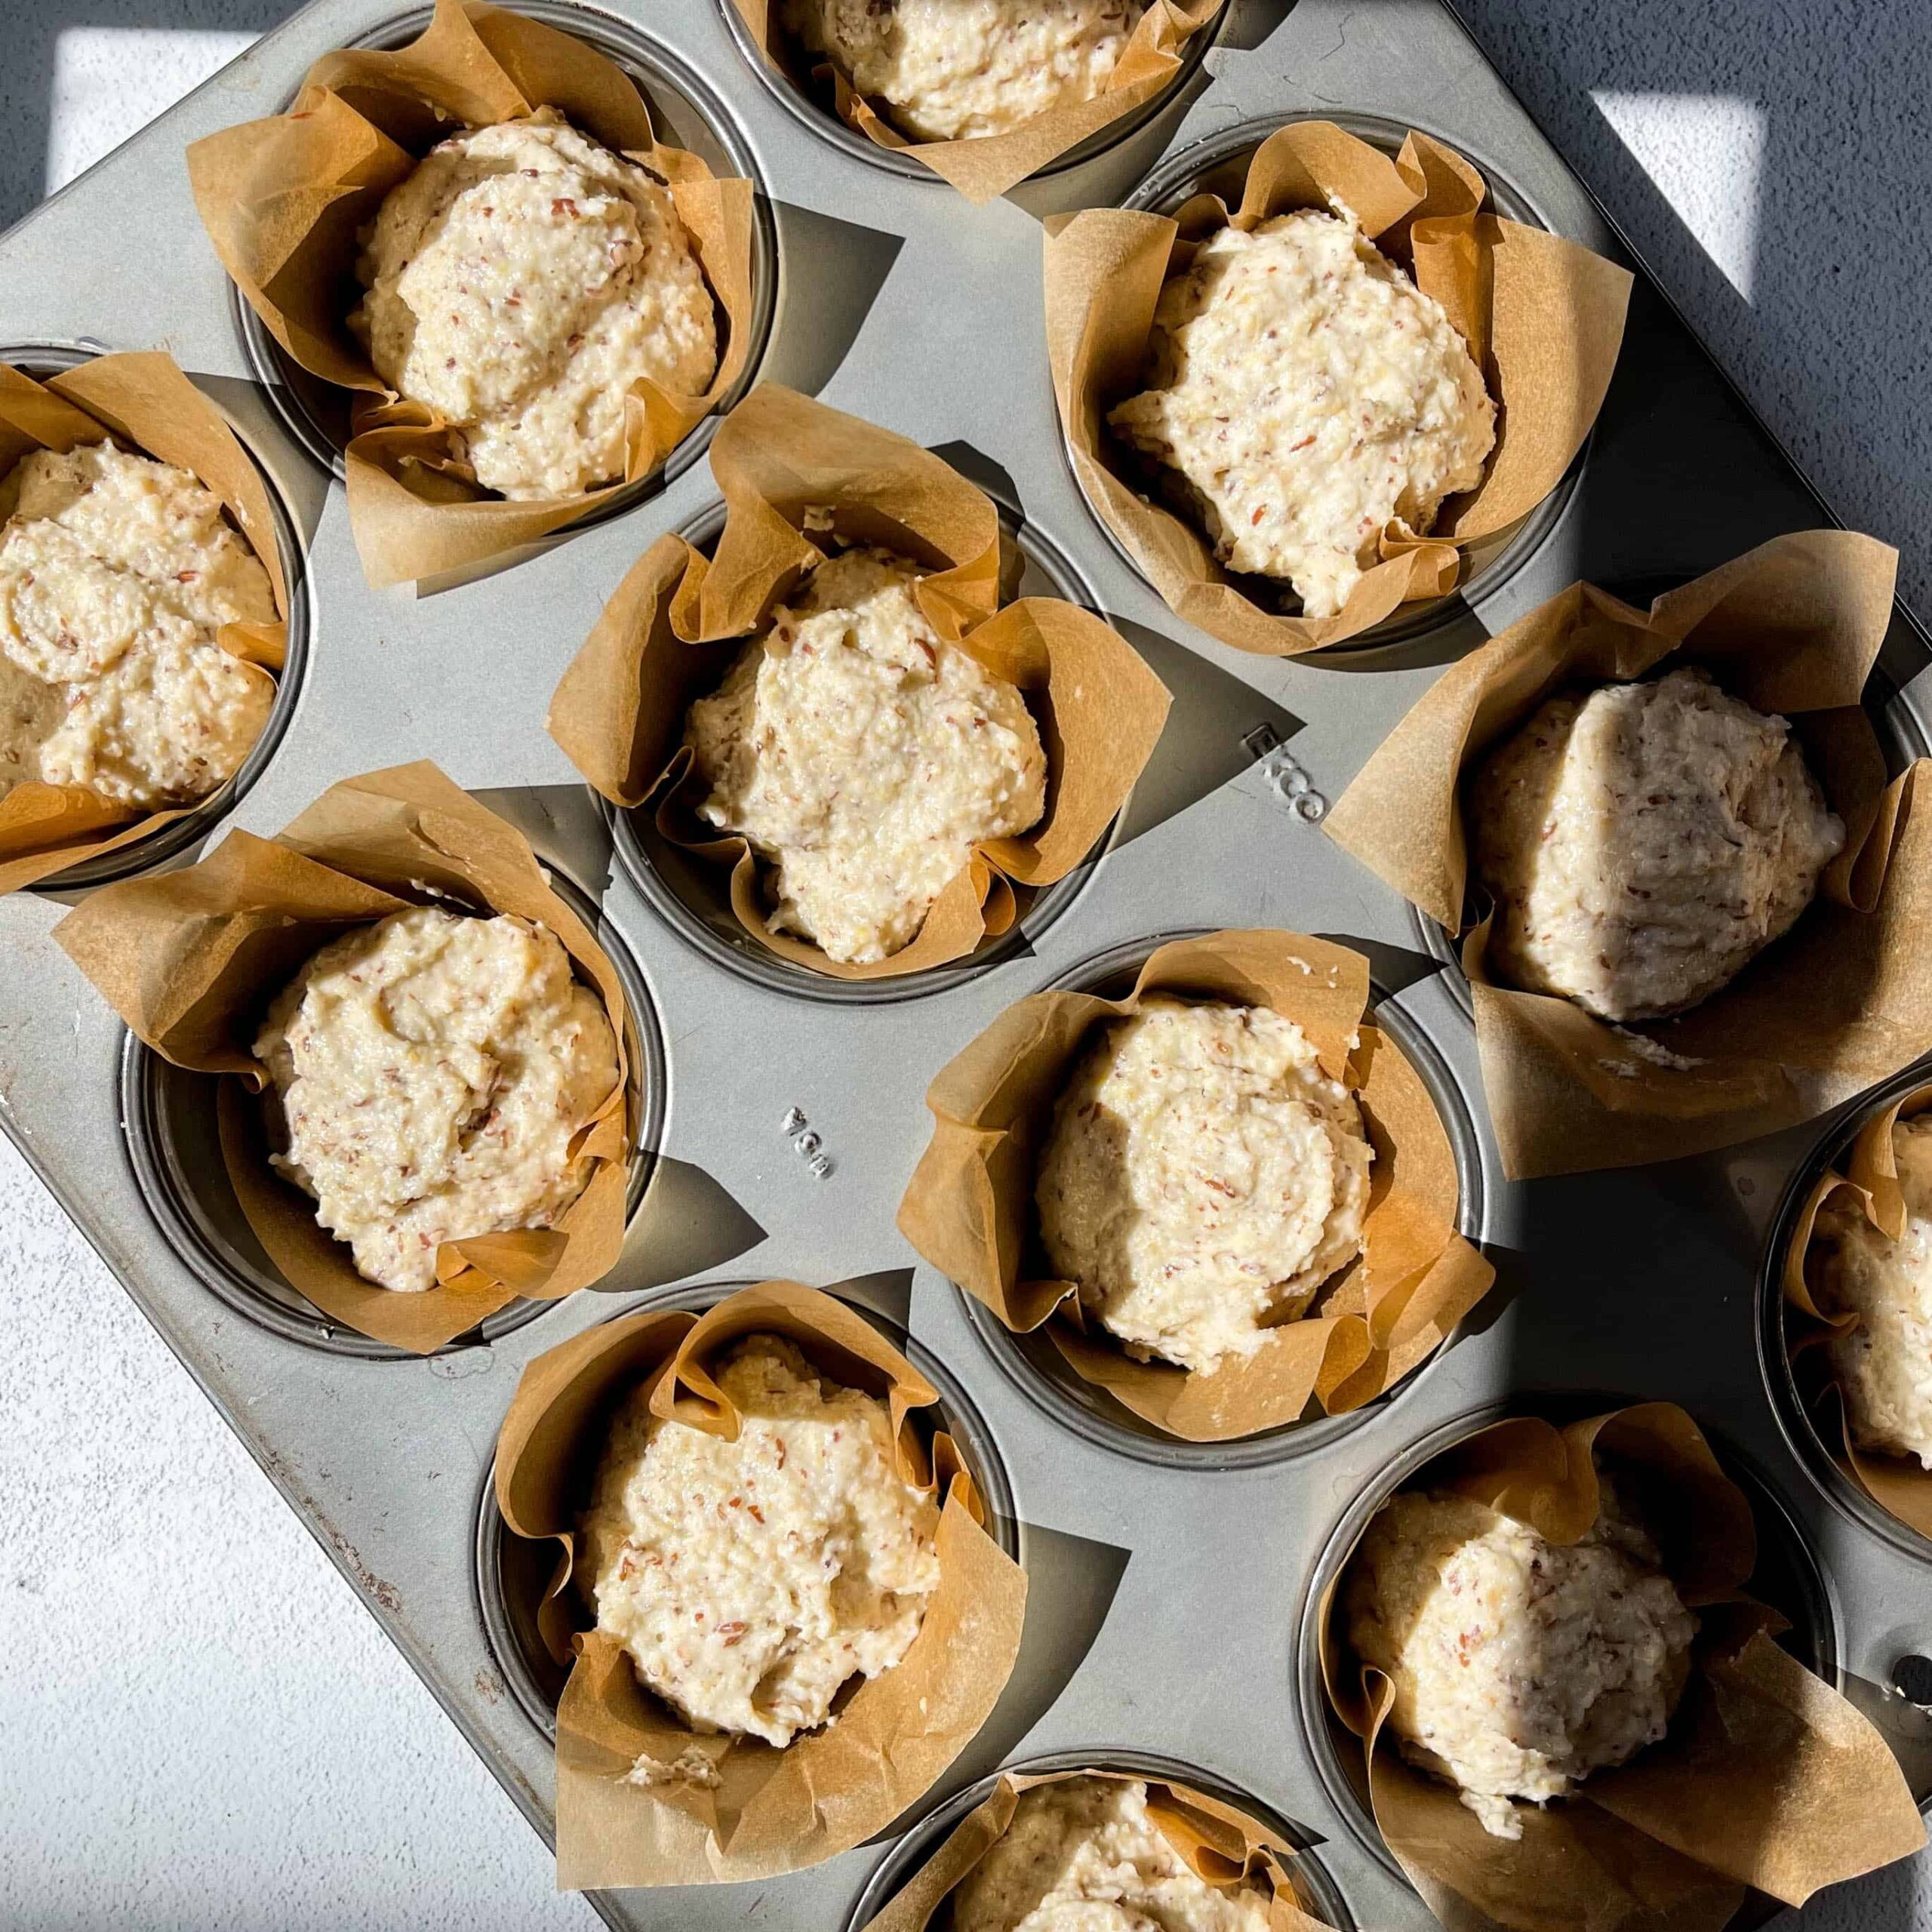 batter in muffin tin for quick and simple healthy vegan grain-free rolls